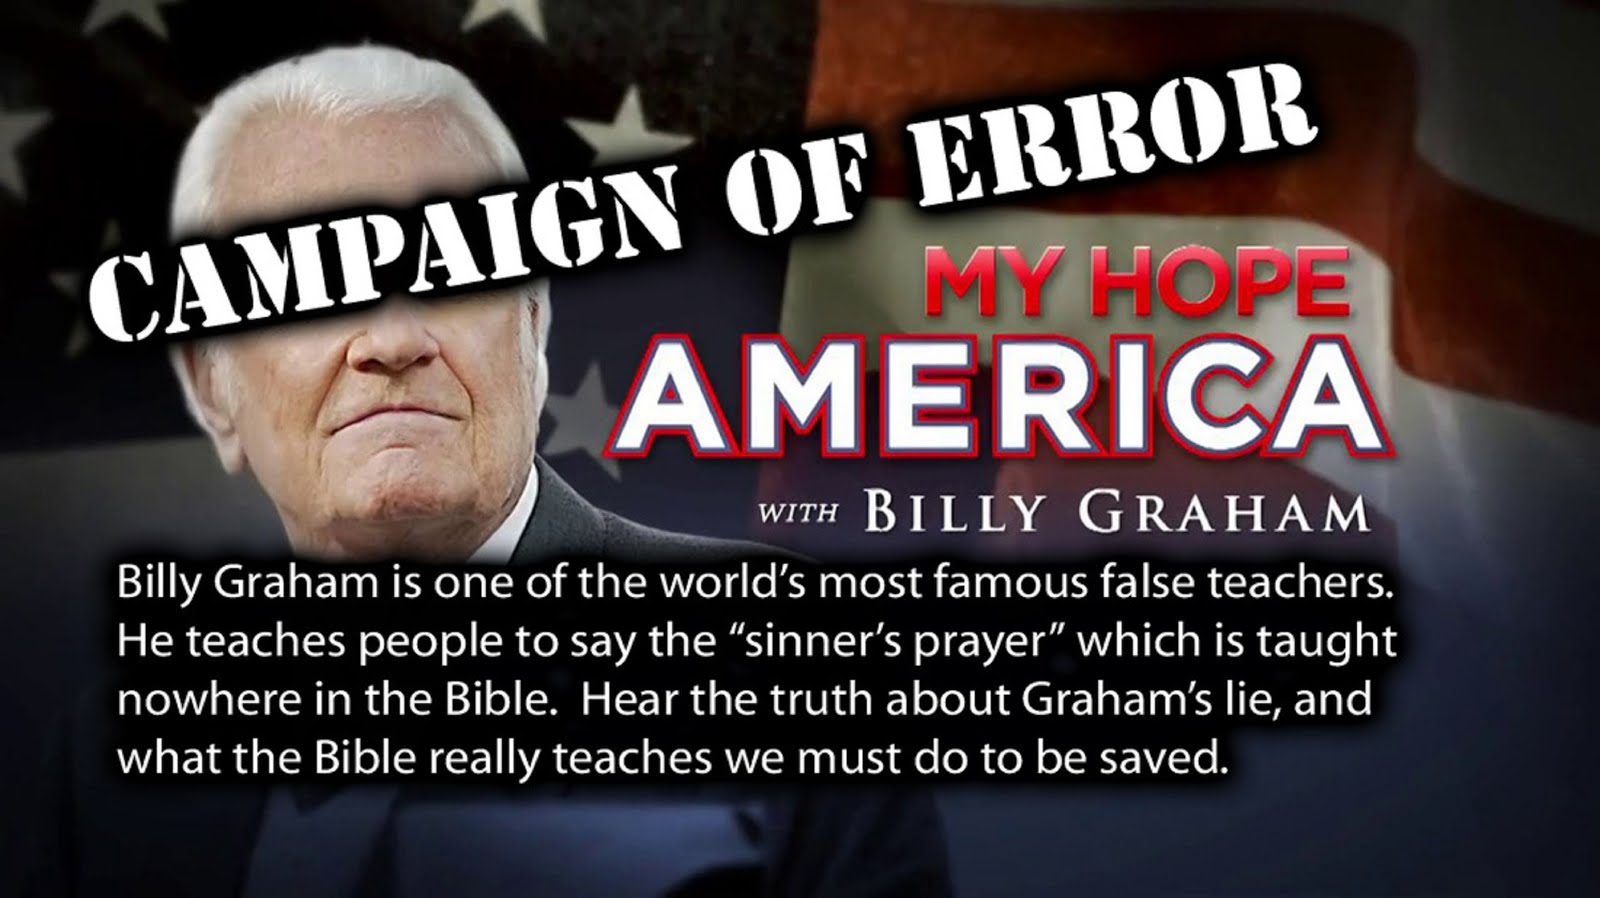 CAMPAIGN OF ERROR - BY BILLY GRAHAM